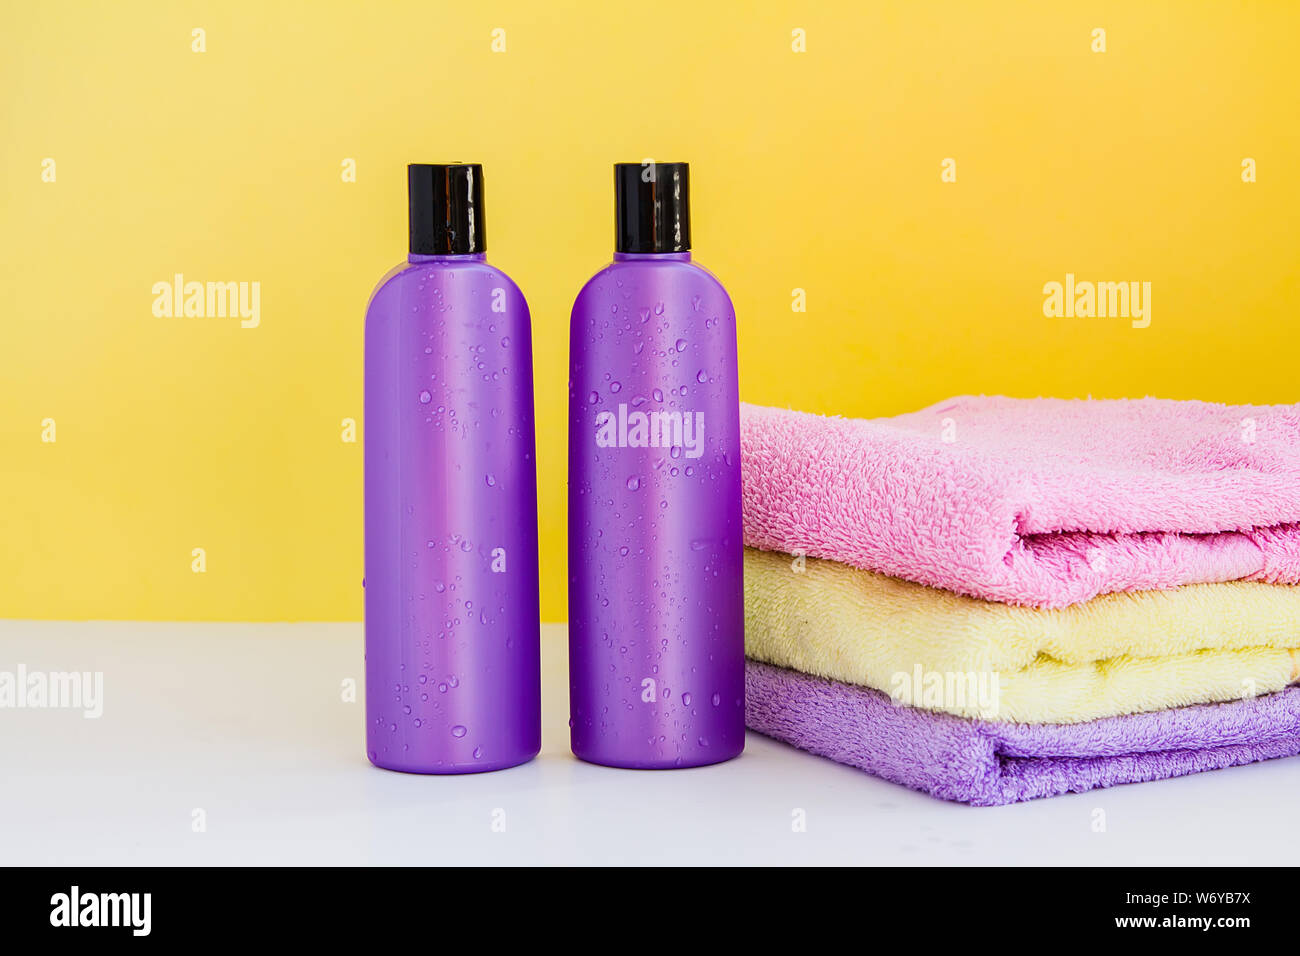 two purple cosmetic bottles and three bath towels for Spa treatments and body and hair care Stock Photo